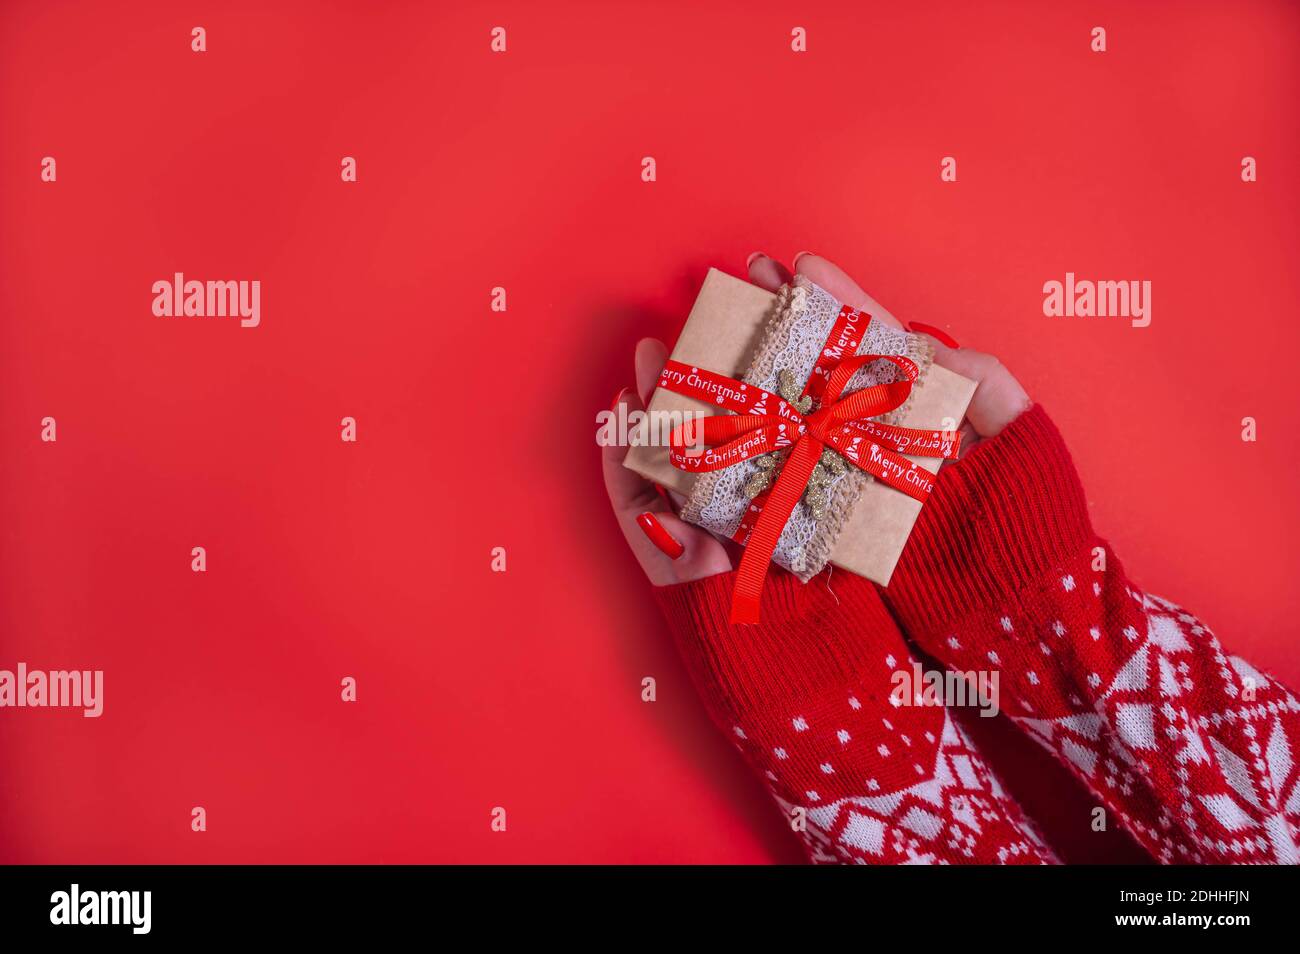 Top view of female hands holding present box package in the palms isolated over flat lay red background.  Christmas background with copy space. Stock Photo